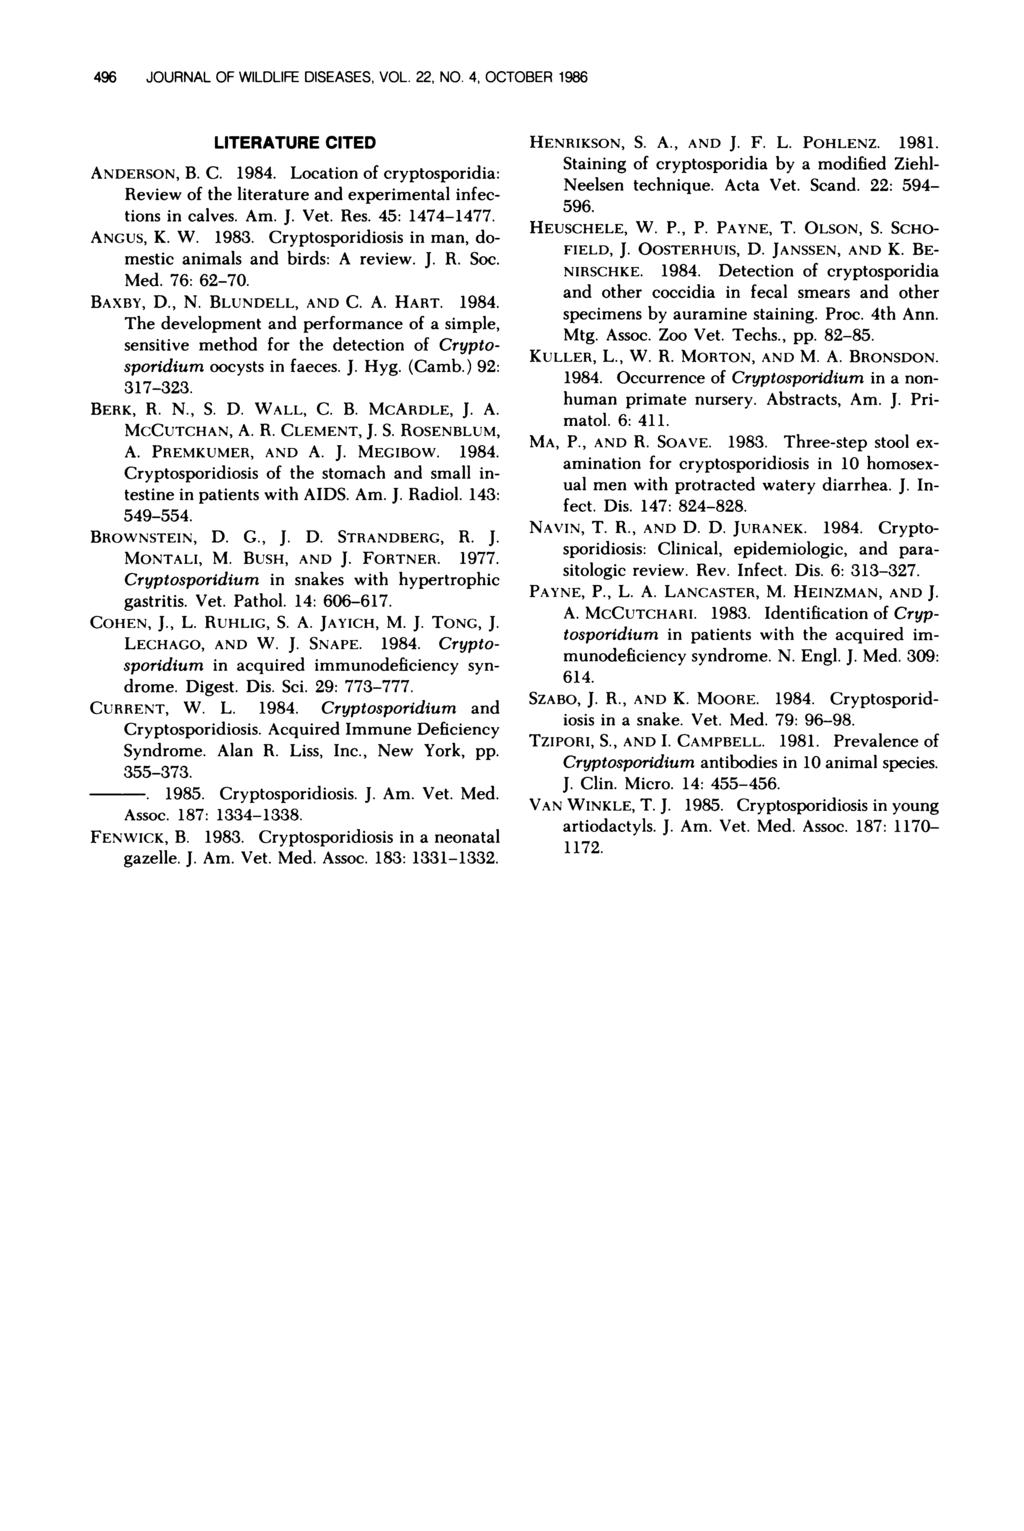 496 JOURNAL OF WILDLIFE DISEASES, VOL. 22, NO. 4, OCTOBER 1986 LITERATURE CITED ANDERSON, B. C. 1984. Location of cryptosporidia: Review of the literature and experimental infections in calves. Am. J. Vet.